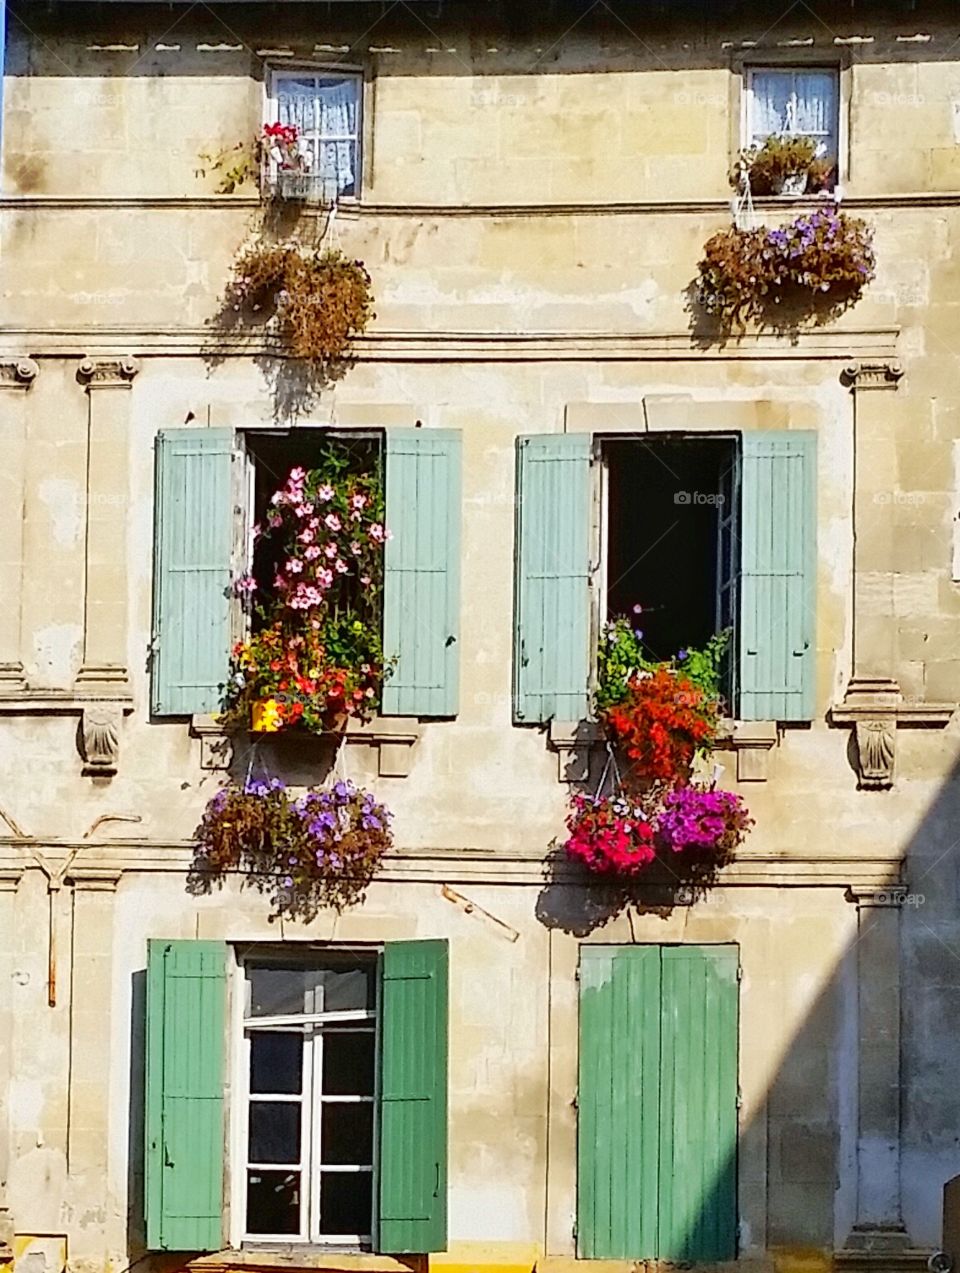 Colorful windows and flowers. I took this photo in Arles, France. People were showing beautiful flowers on their old windows.